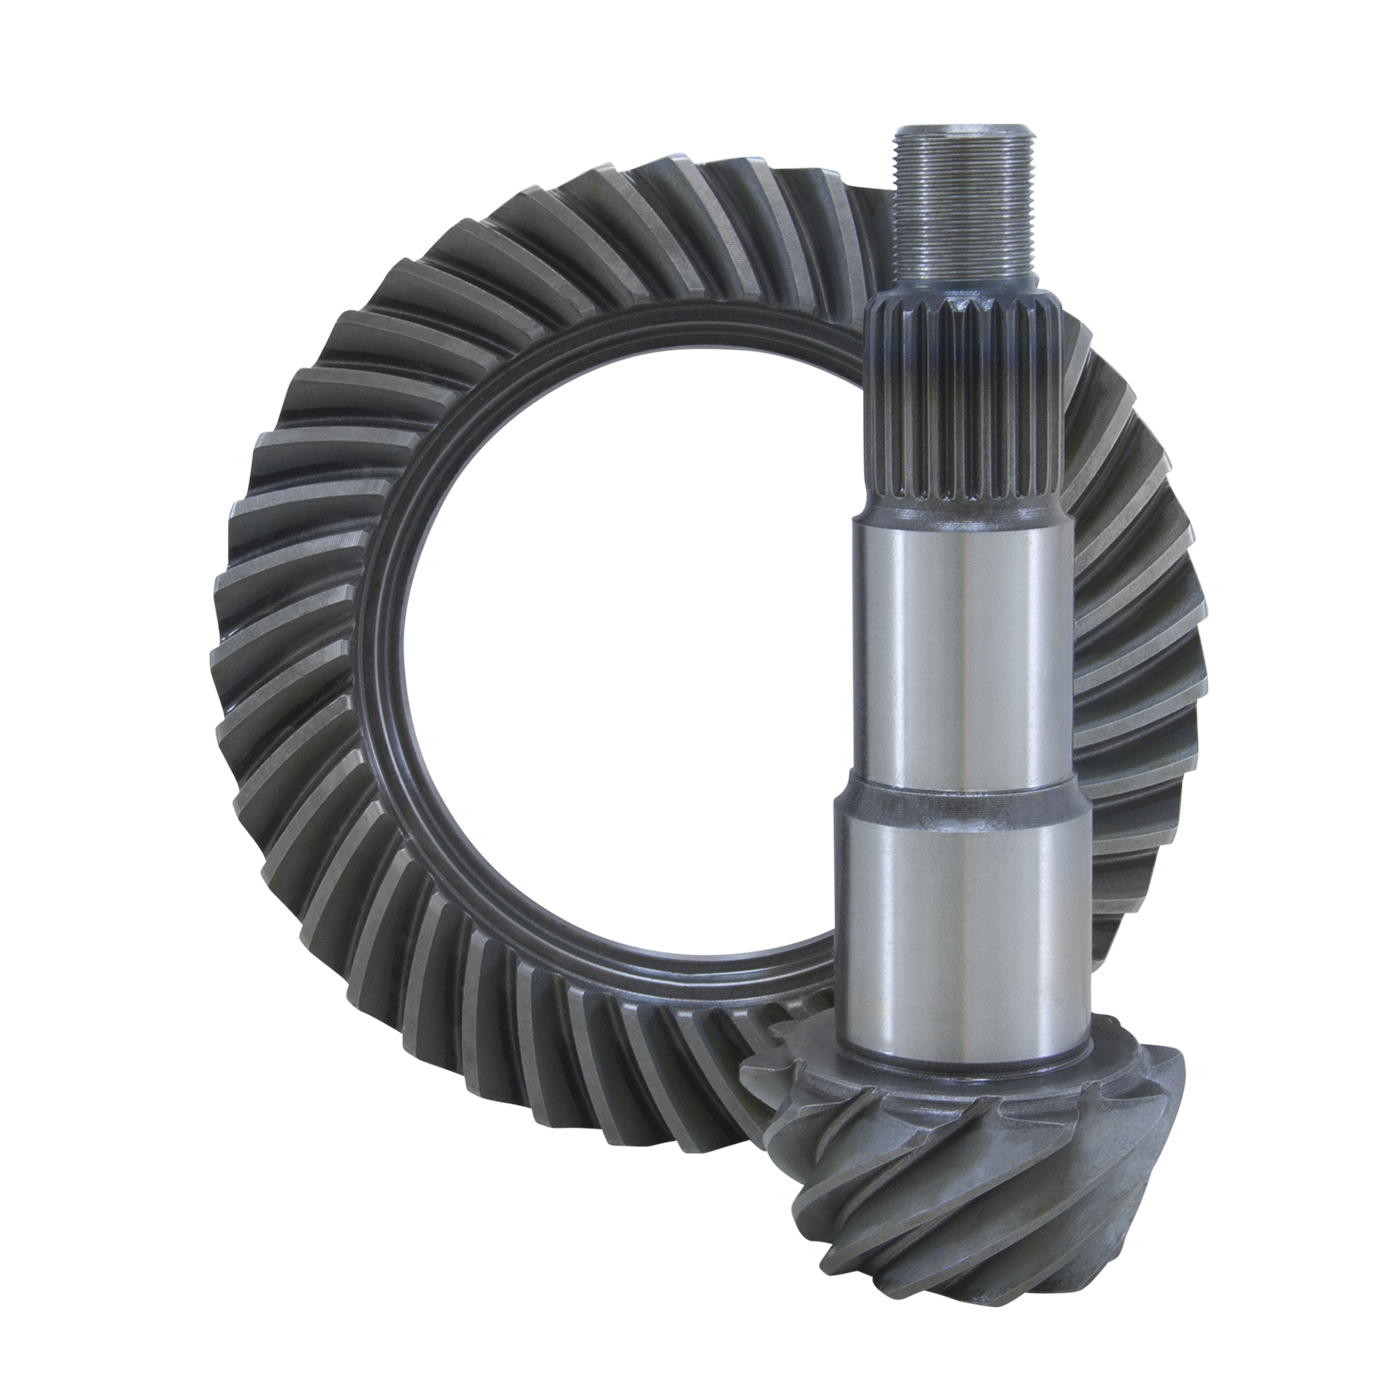 USA Standard Ring & Pinion set for Dana 30 JK reverse rotation in a 4.88 ratio